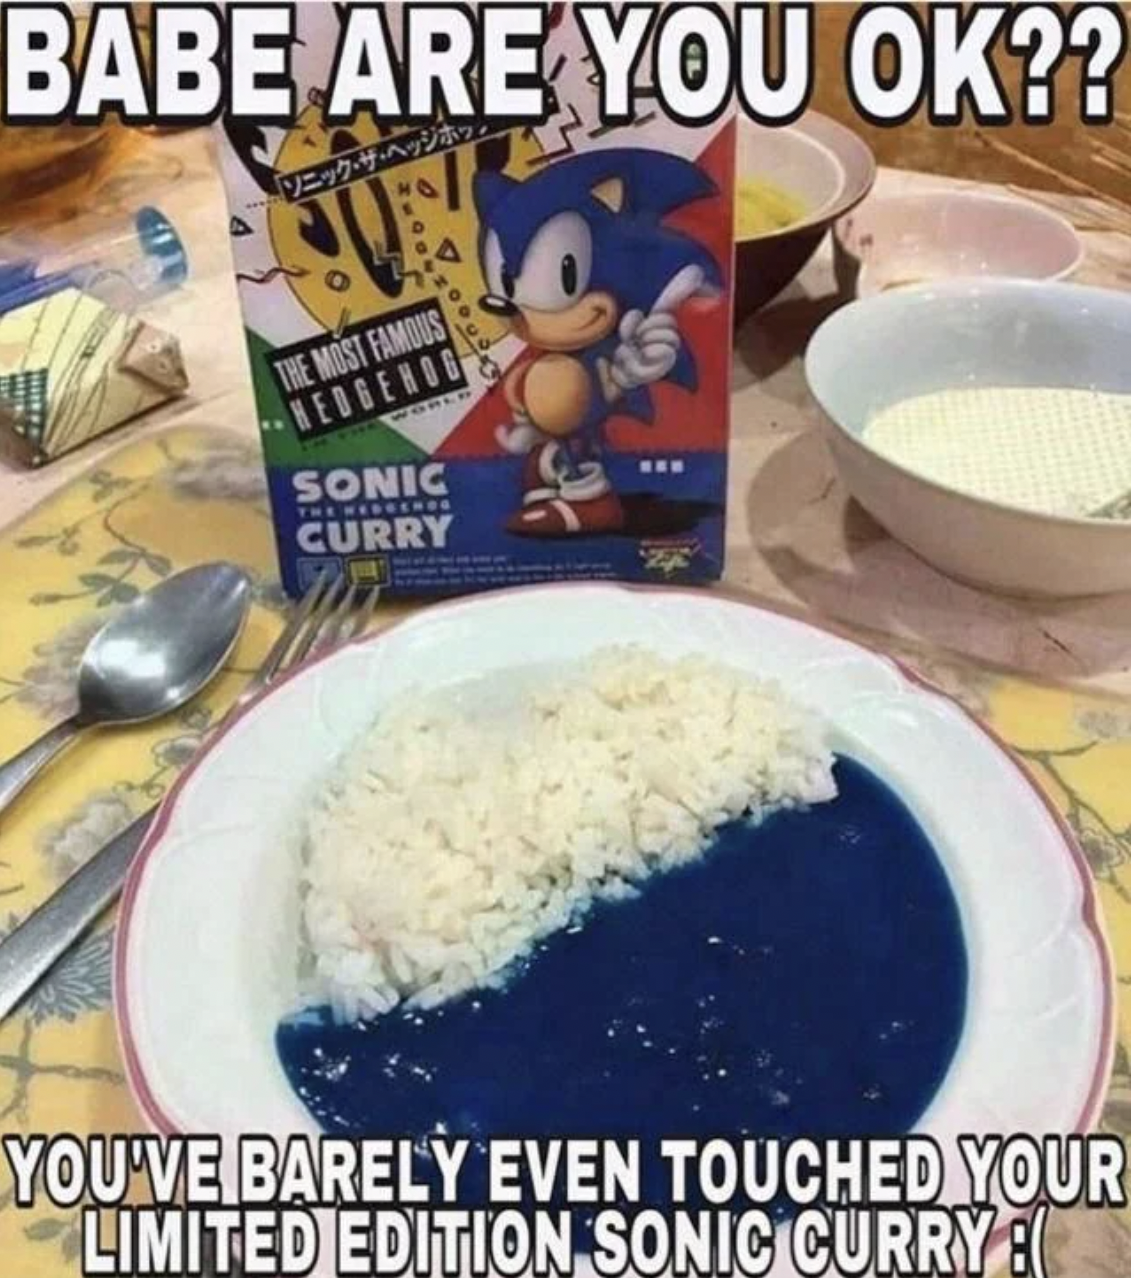 Cringey pics - The Most Famous Hedgeho Sonic Curry www You'Ve Barely Even Touched Your Limited Edition Sonic Curry